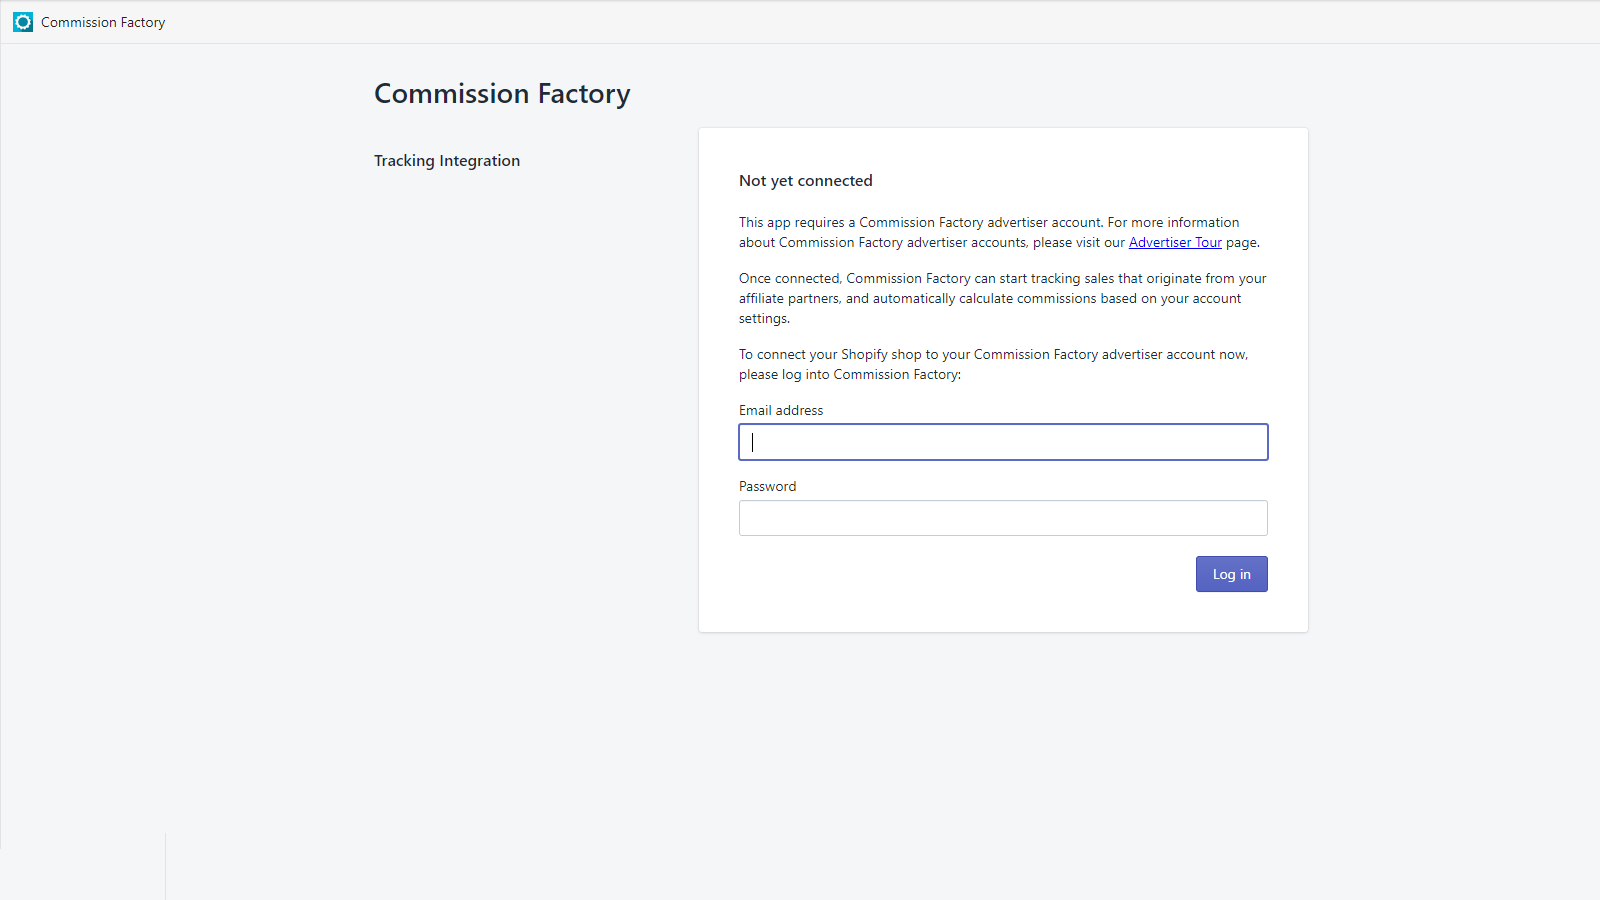 Log into your Commission Factory user profile to get started